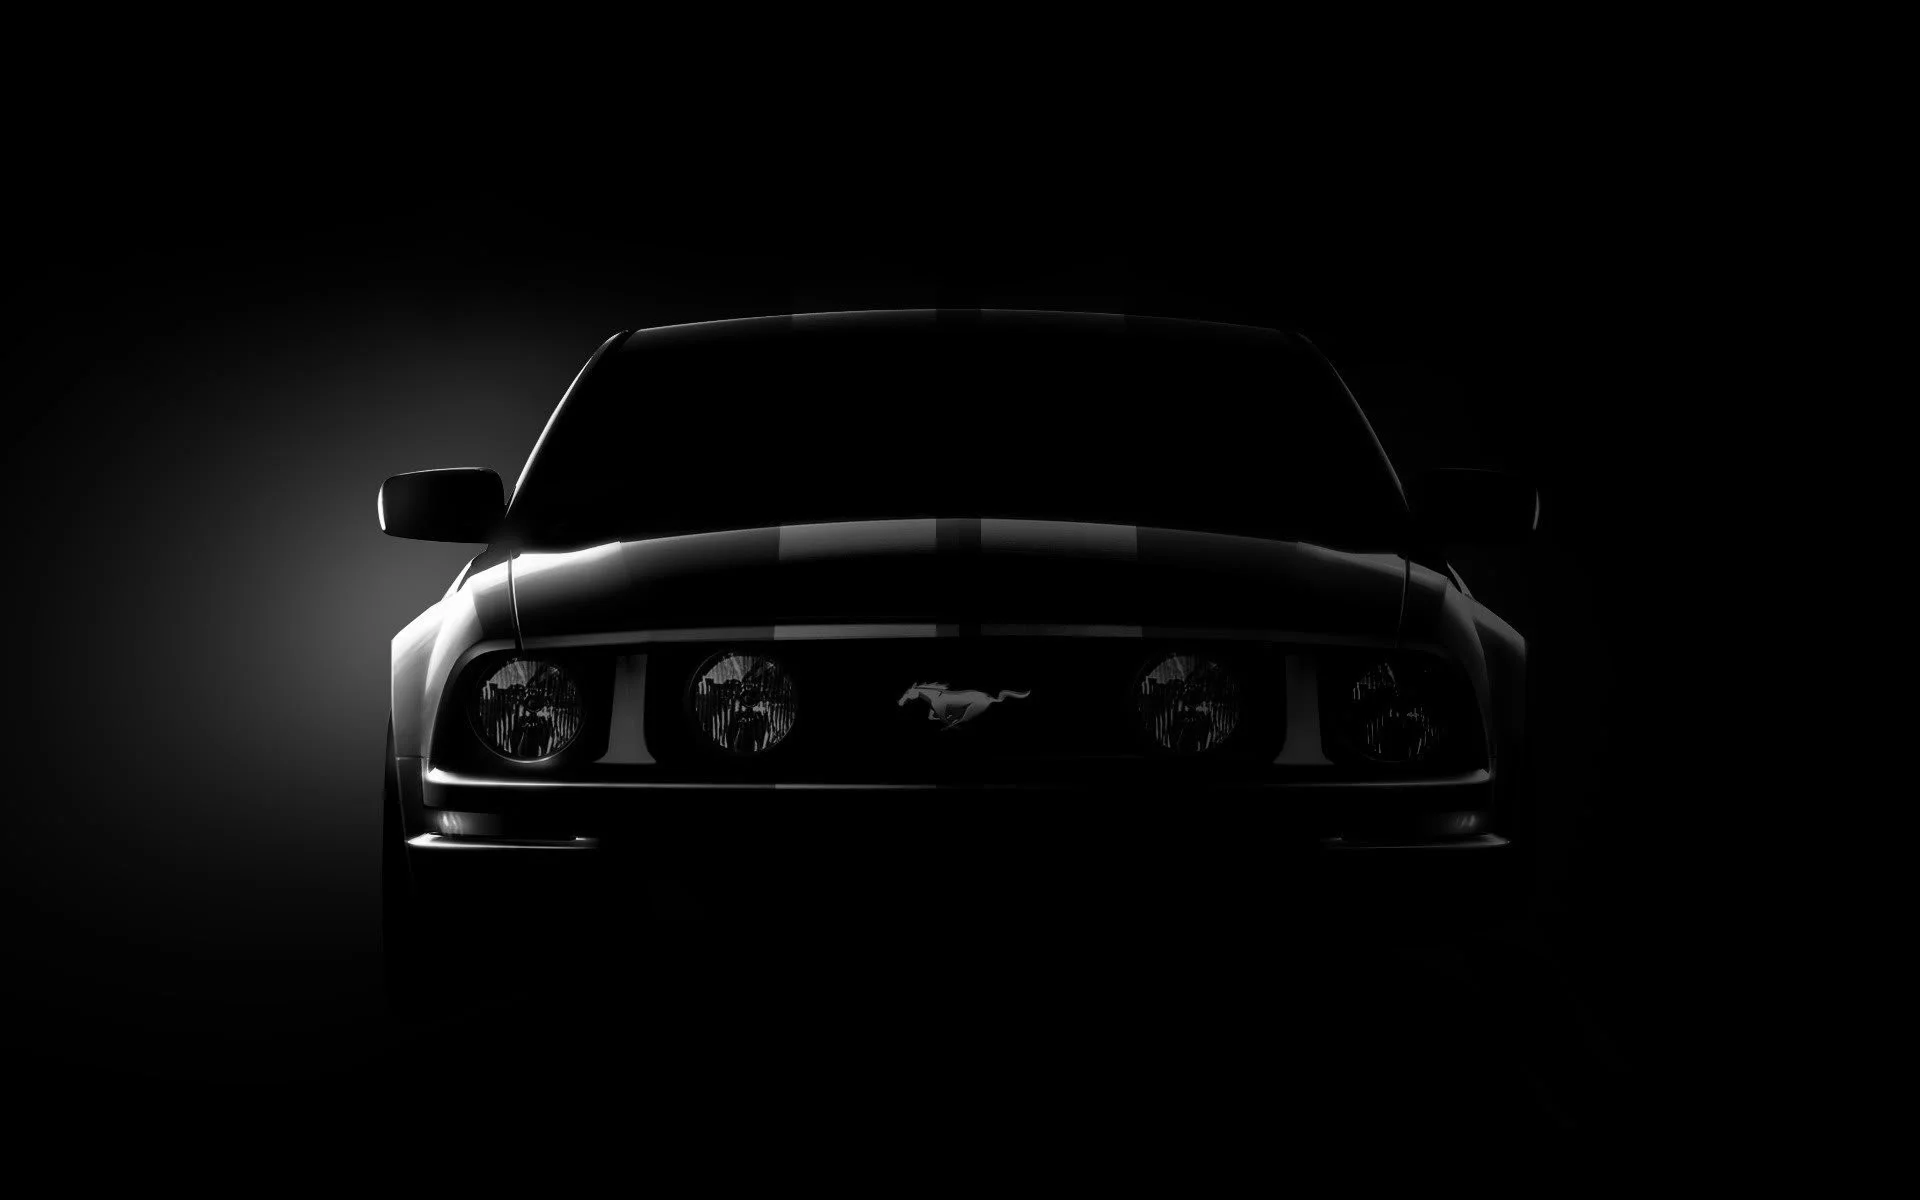 Black Car Hd Wallpaper For Android